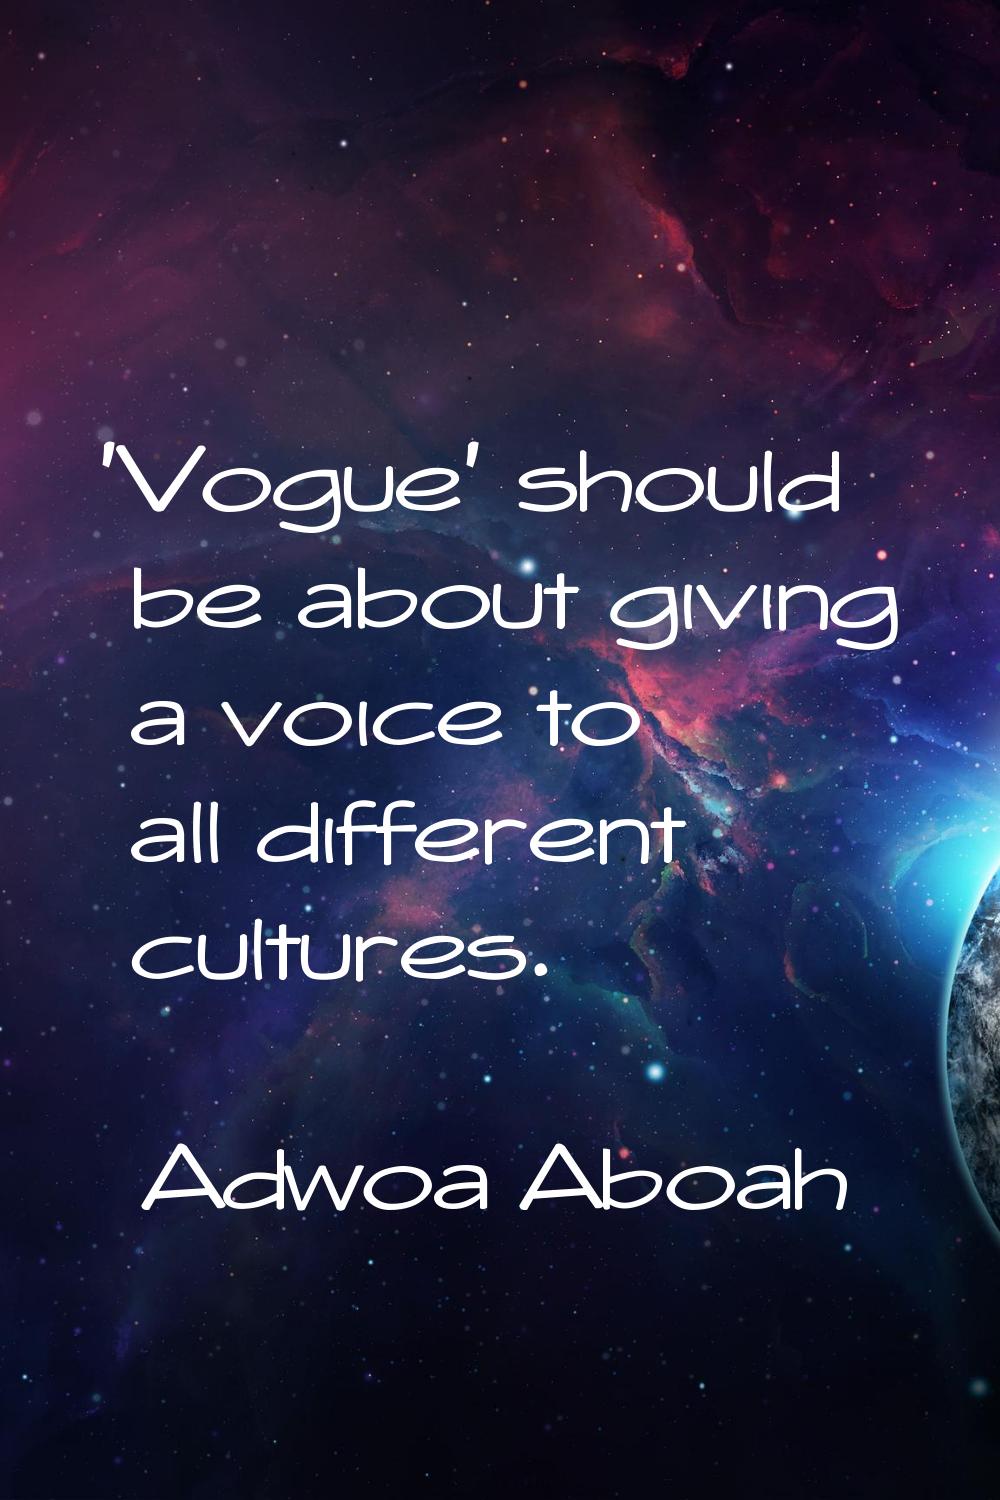 'Vogue' should be about giving a voice to all different cultures.